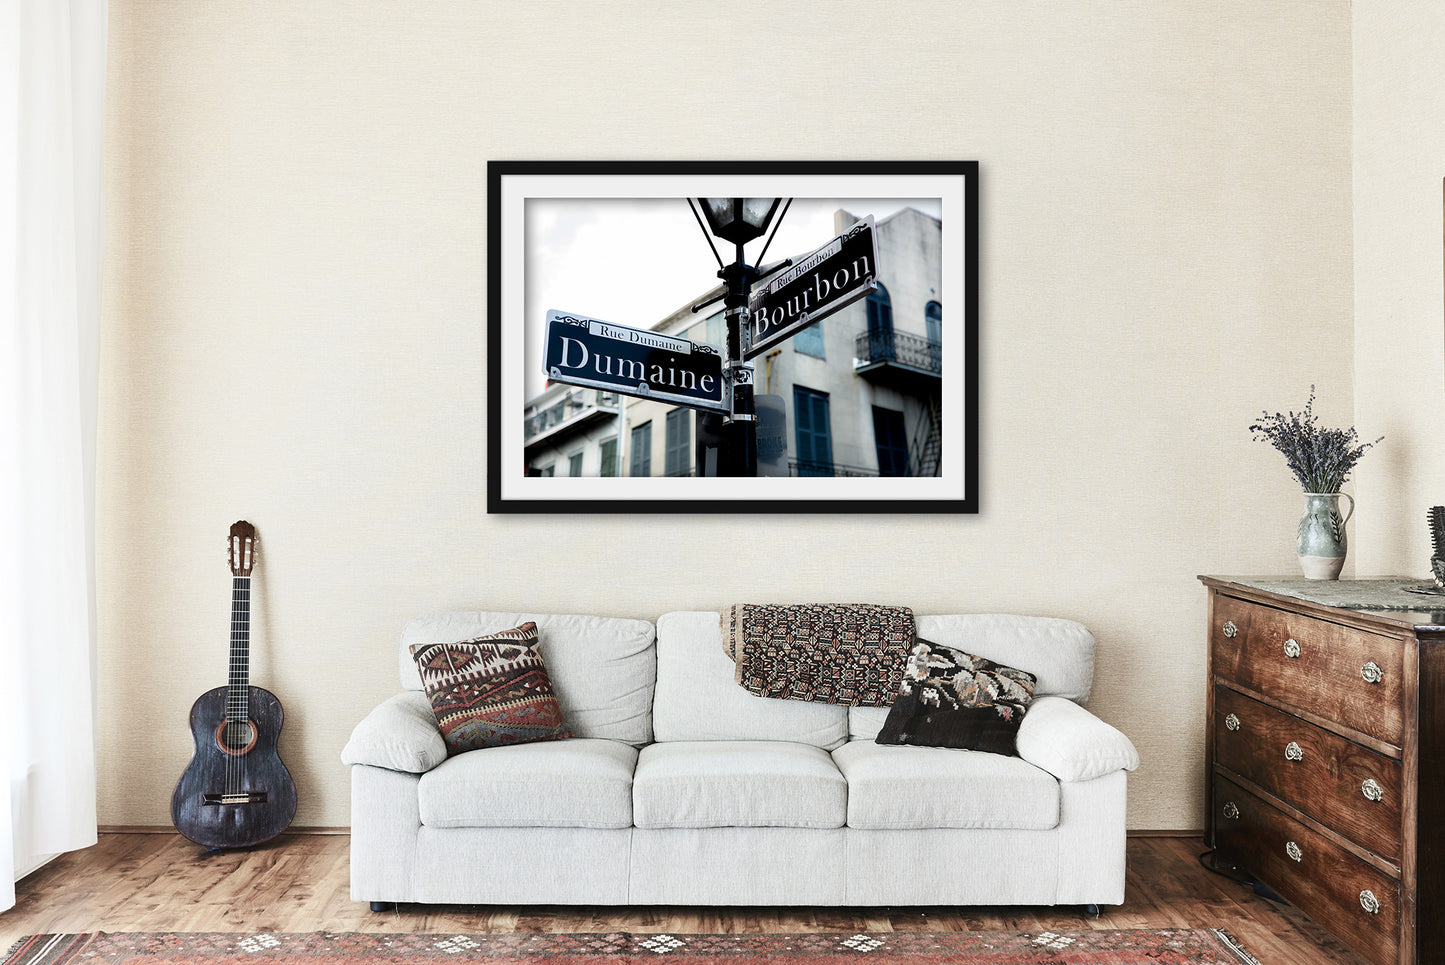 Framed NOLA Print with Optional Mat (Ready to Hang) Picture of Street Signs at Intersection of Dumaine and Bourbon Street in New Orleans Louisiana Wall Art French Quarter Decor